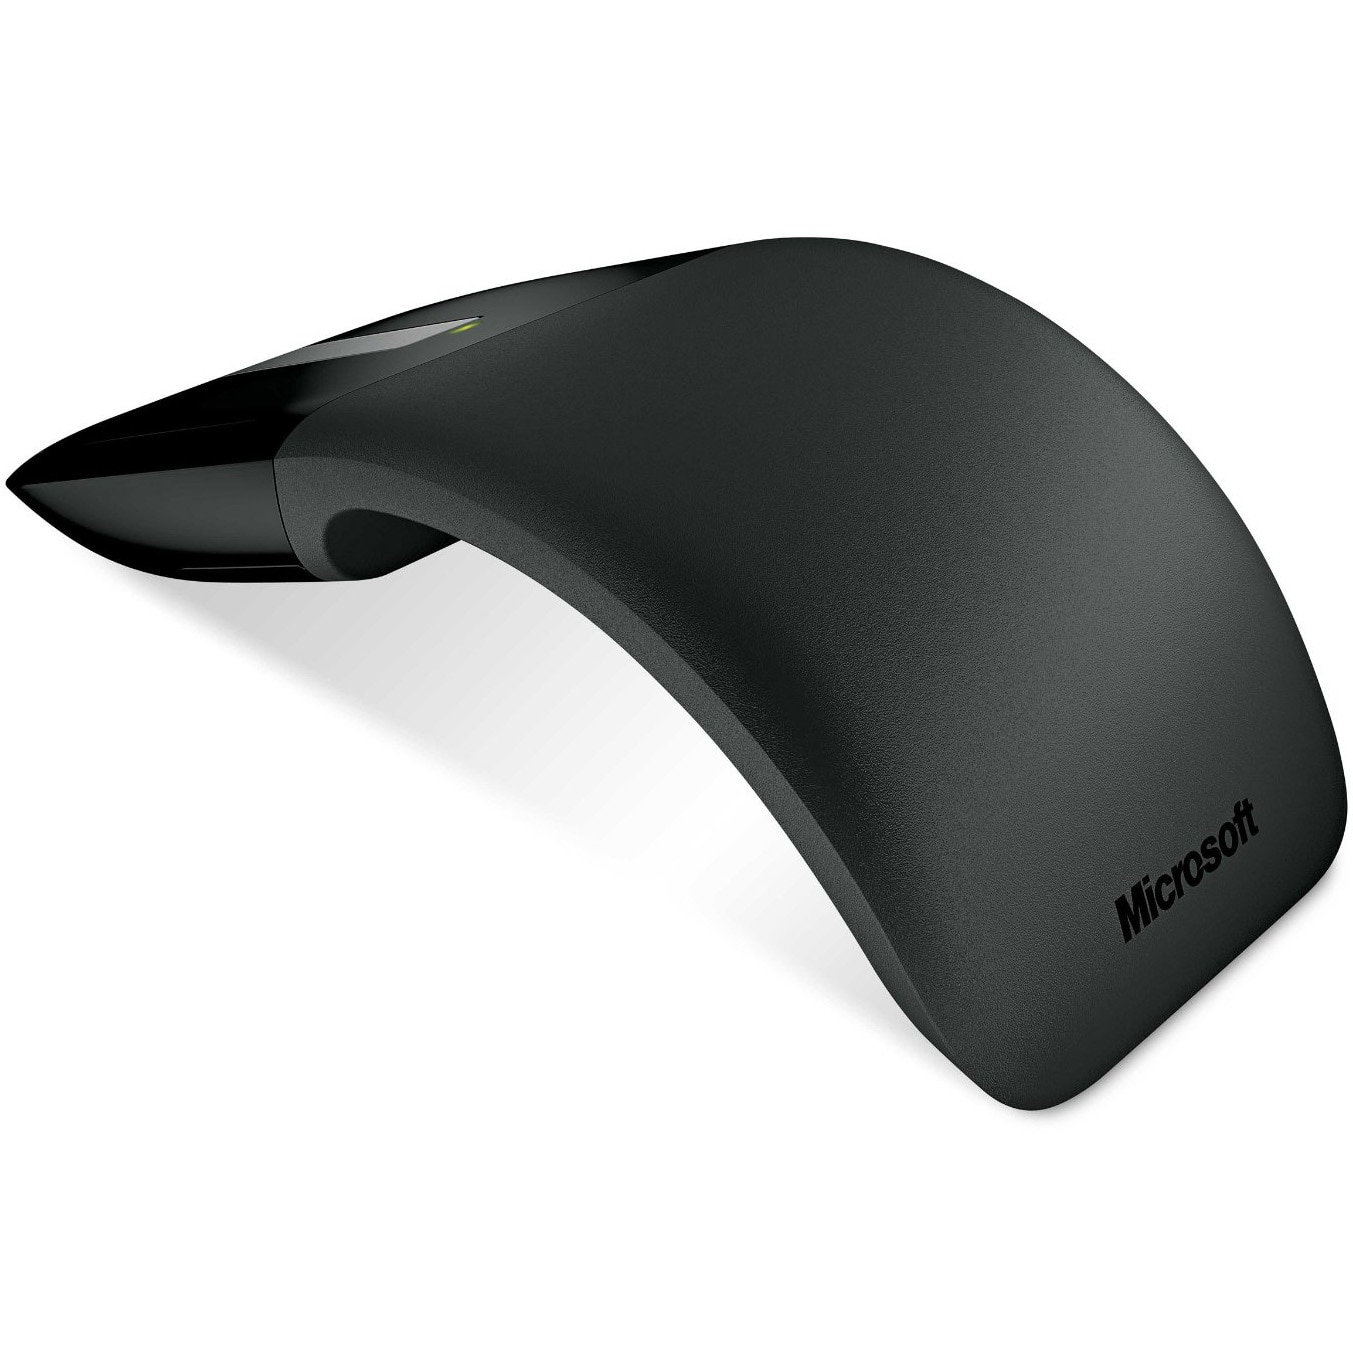 Execution often place Microsoft ARC Touch Mouse, Wireless, Negru - eMAG.ro